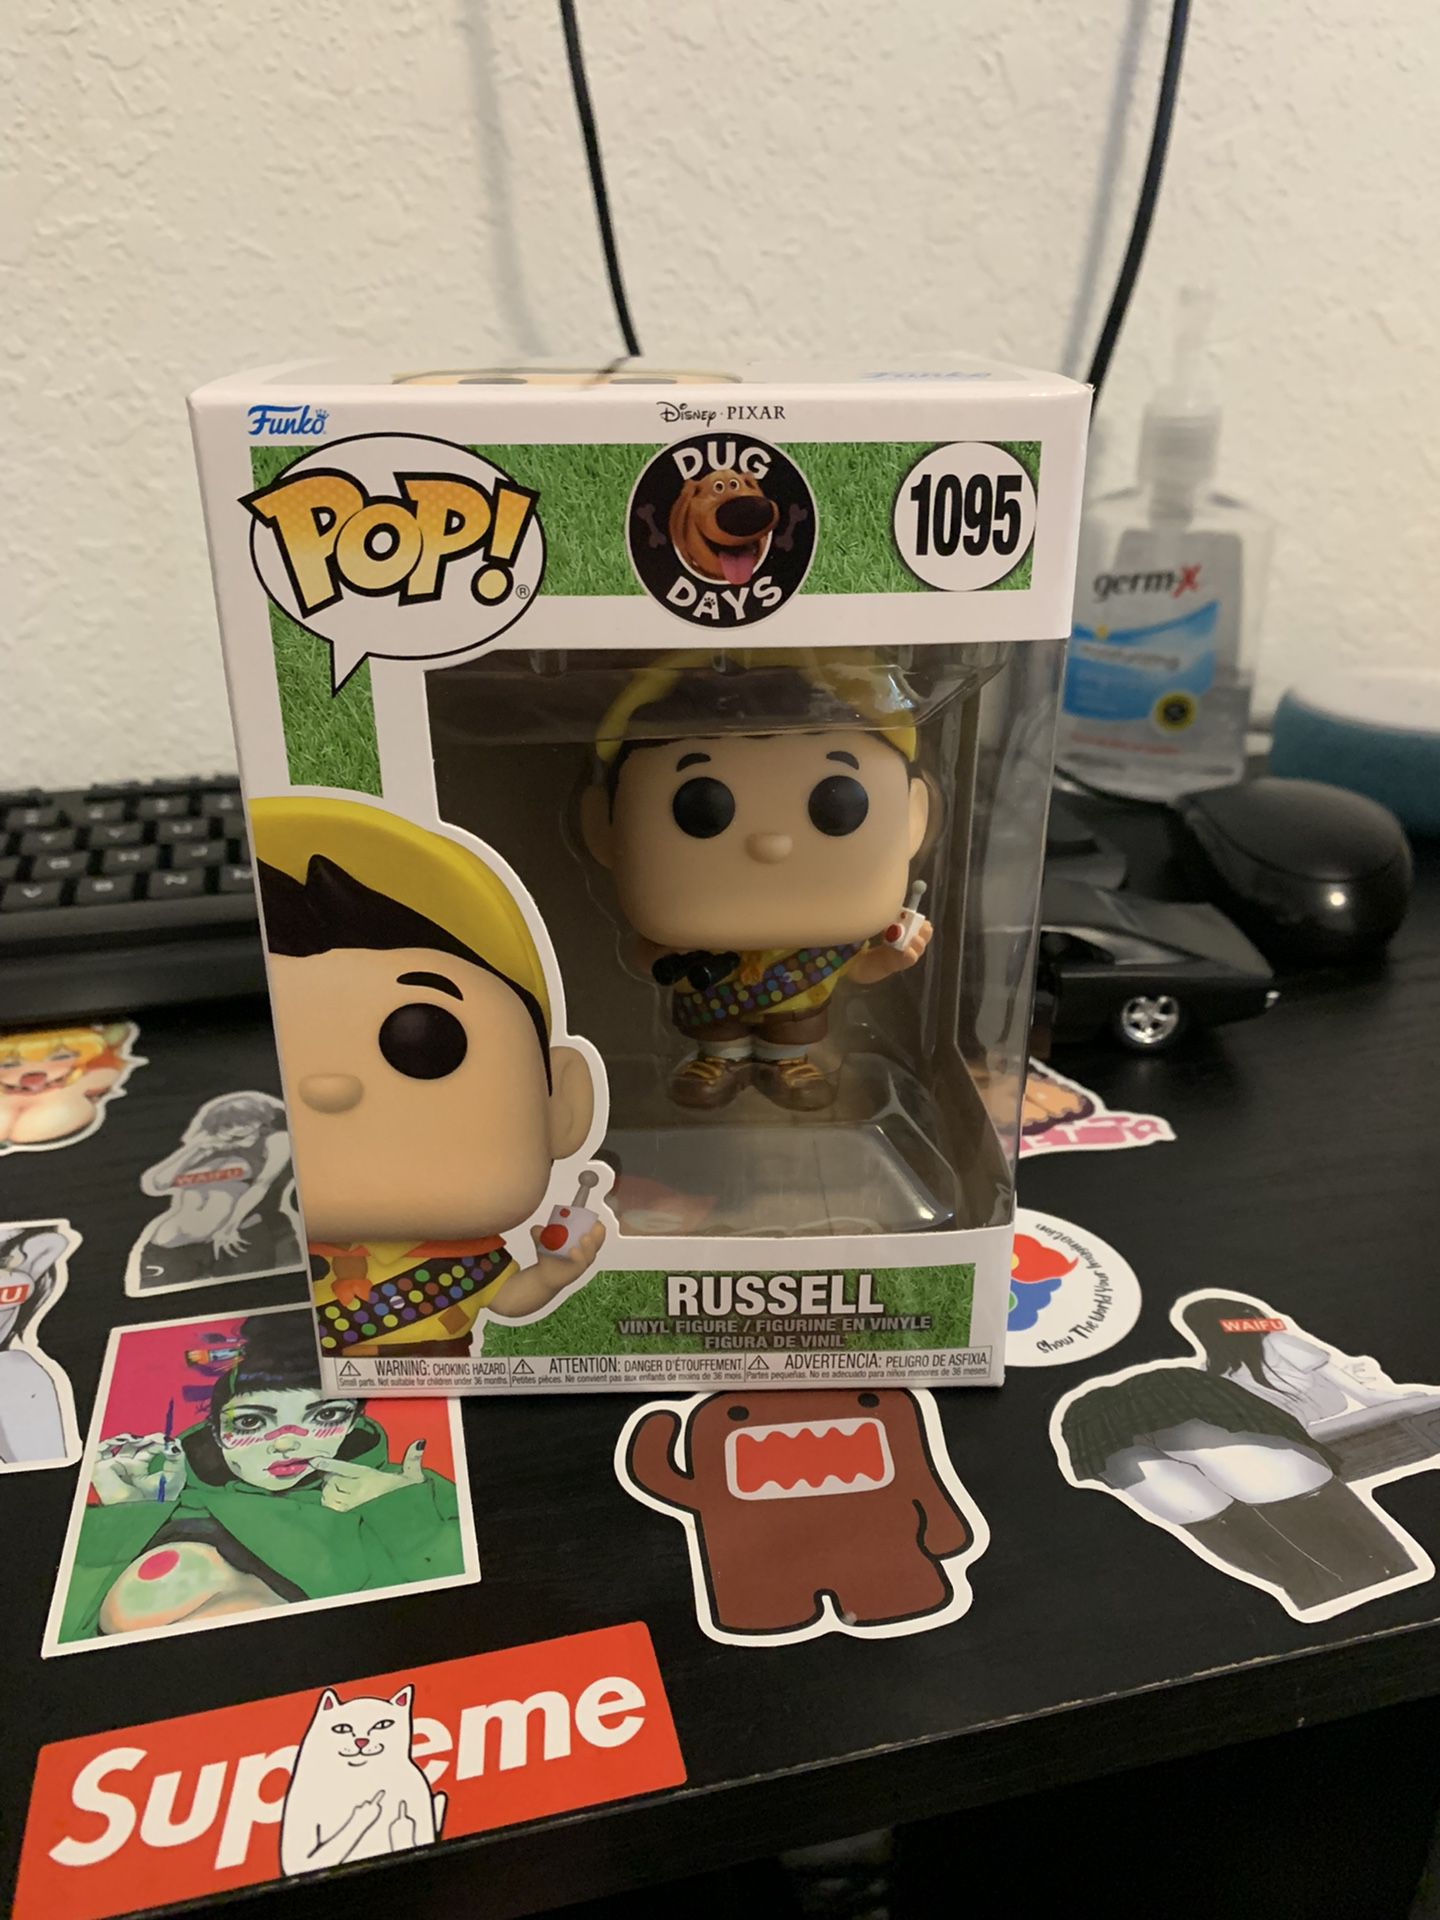 (up) Russell Funko Pop